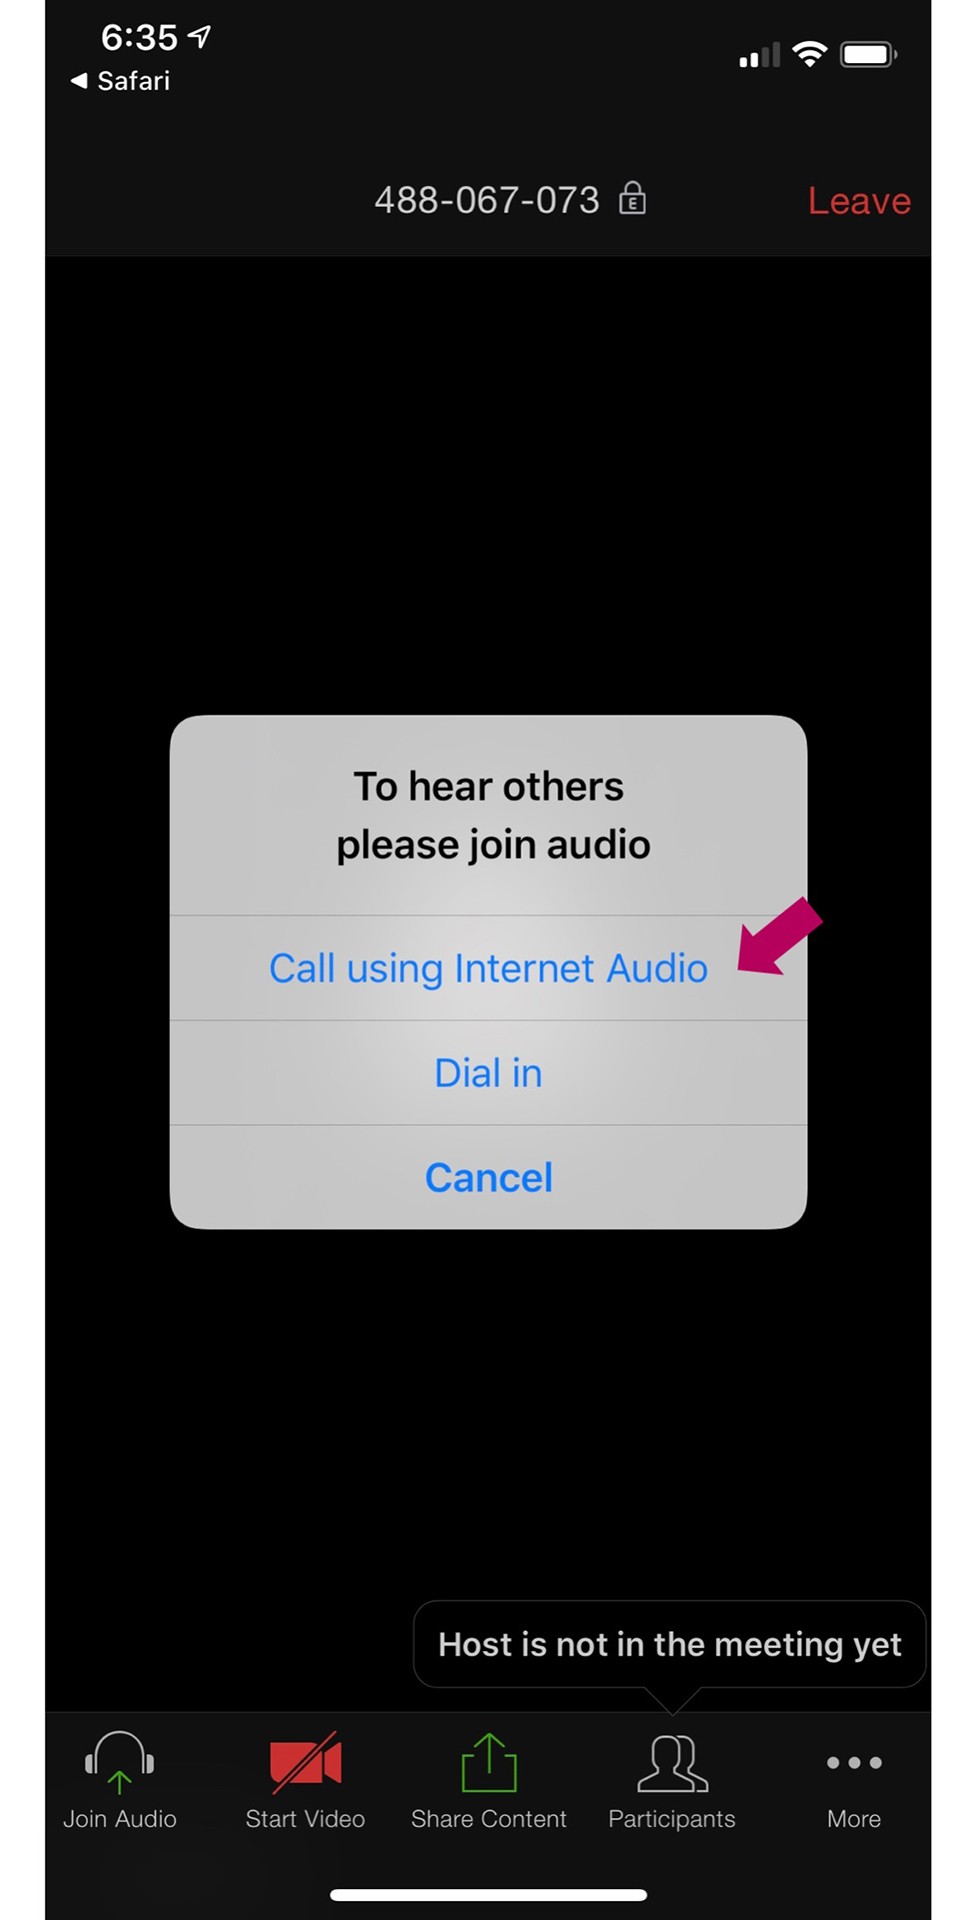 Click Call using Internet Audio in order to hear your instructor.